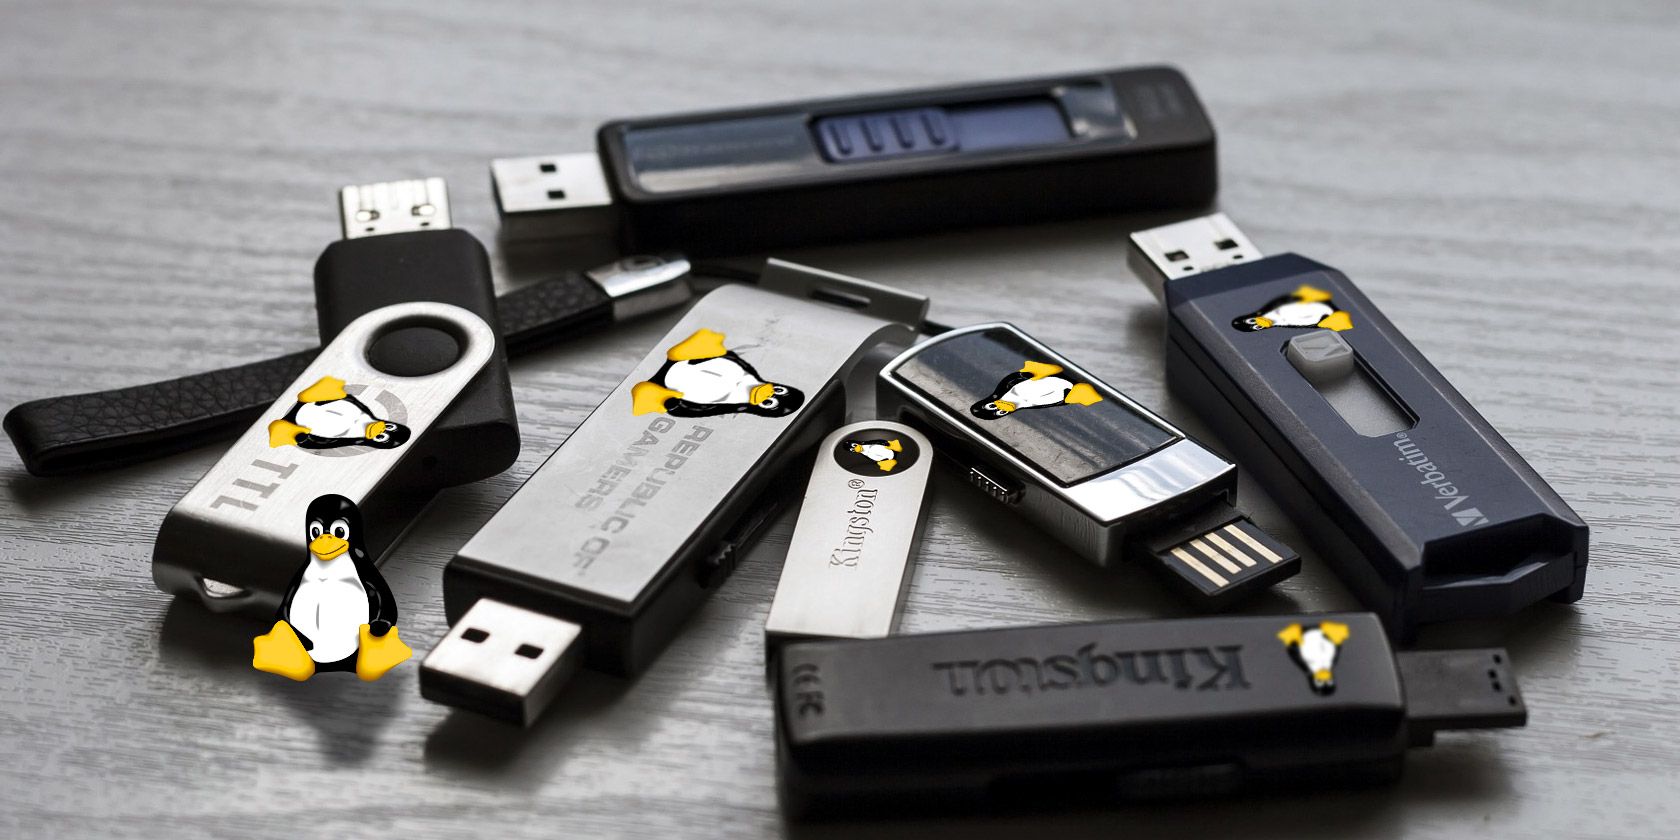 5 Best to Install on a USB Stick